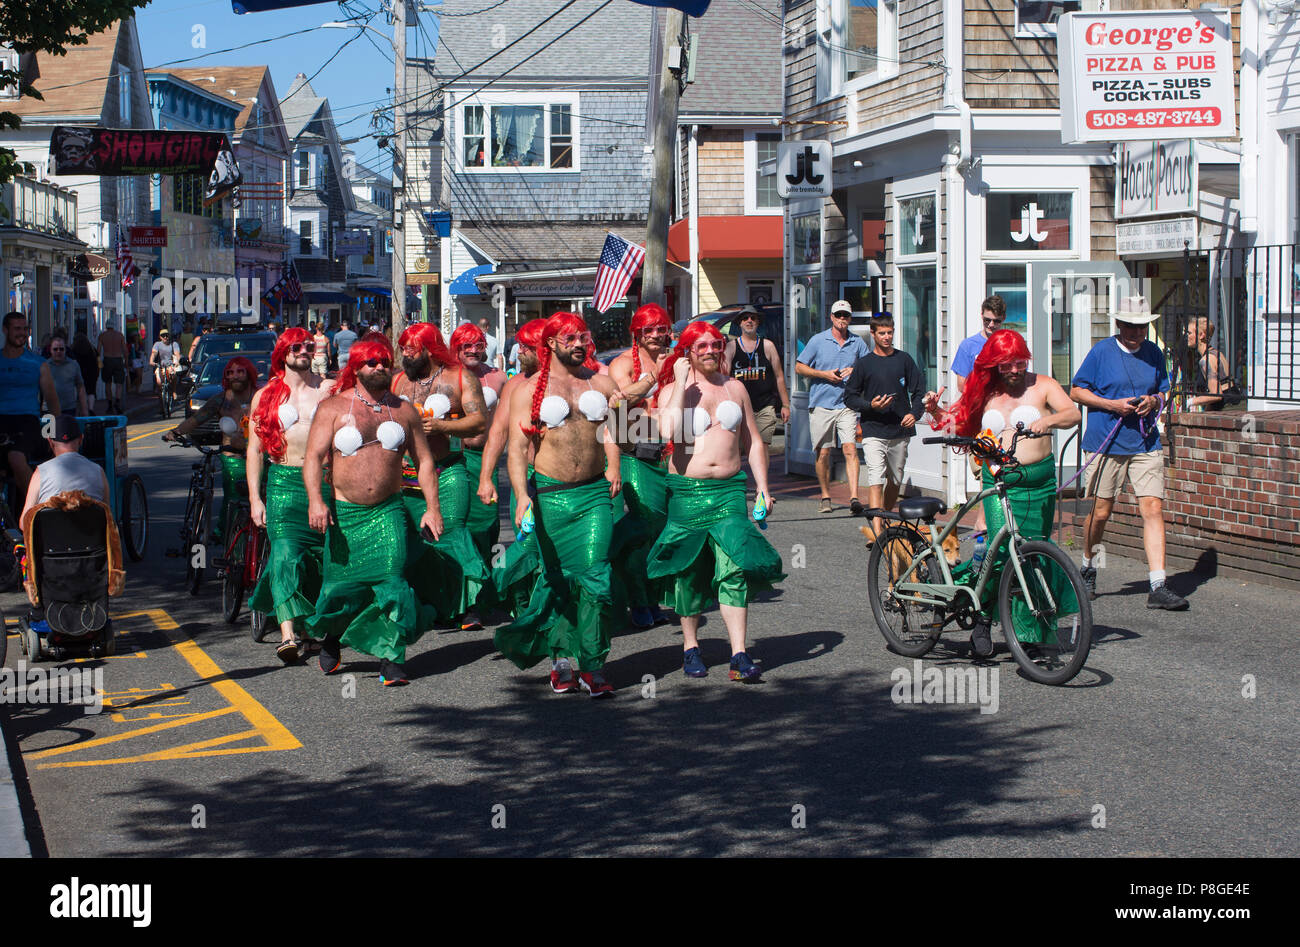 A group of 'mermaids' march through the streets of Provincetown, Massachusetts on Cape Cod, USA Stock Photo